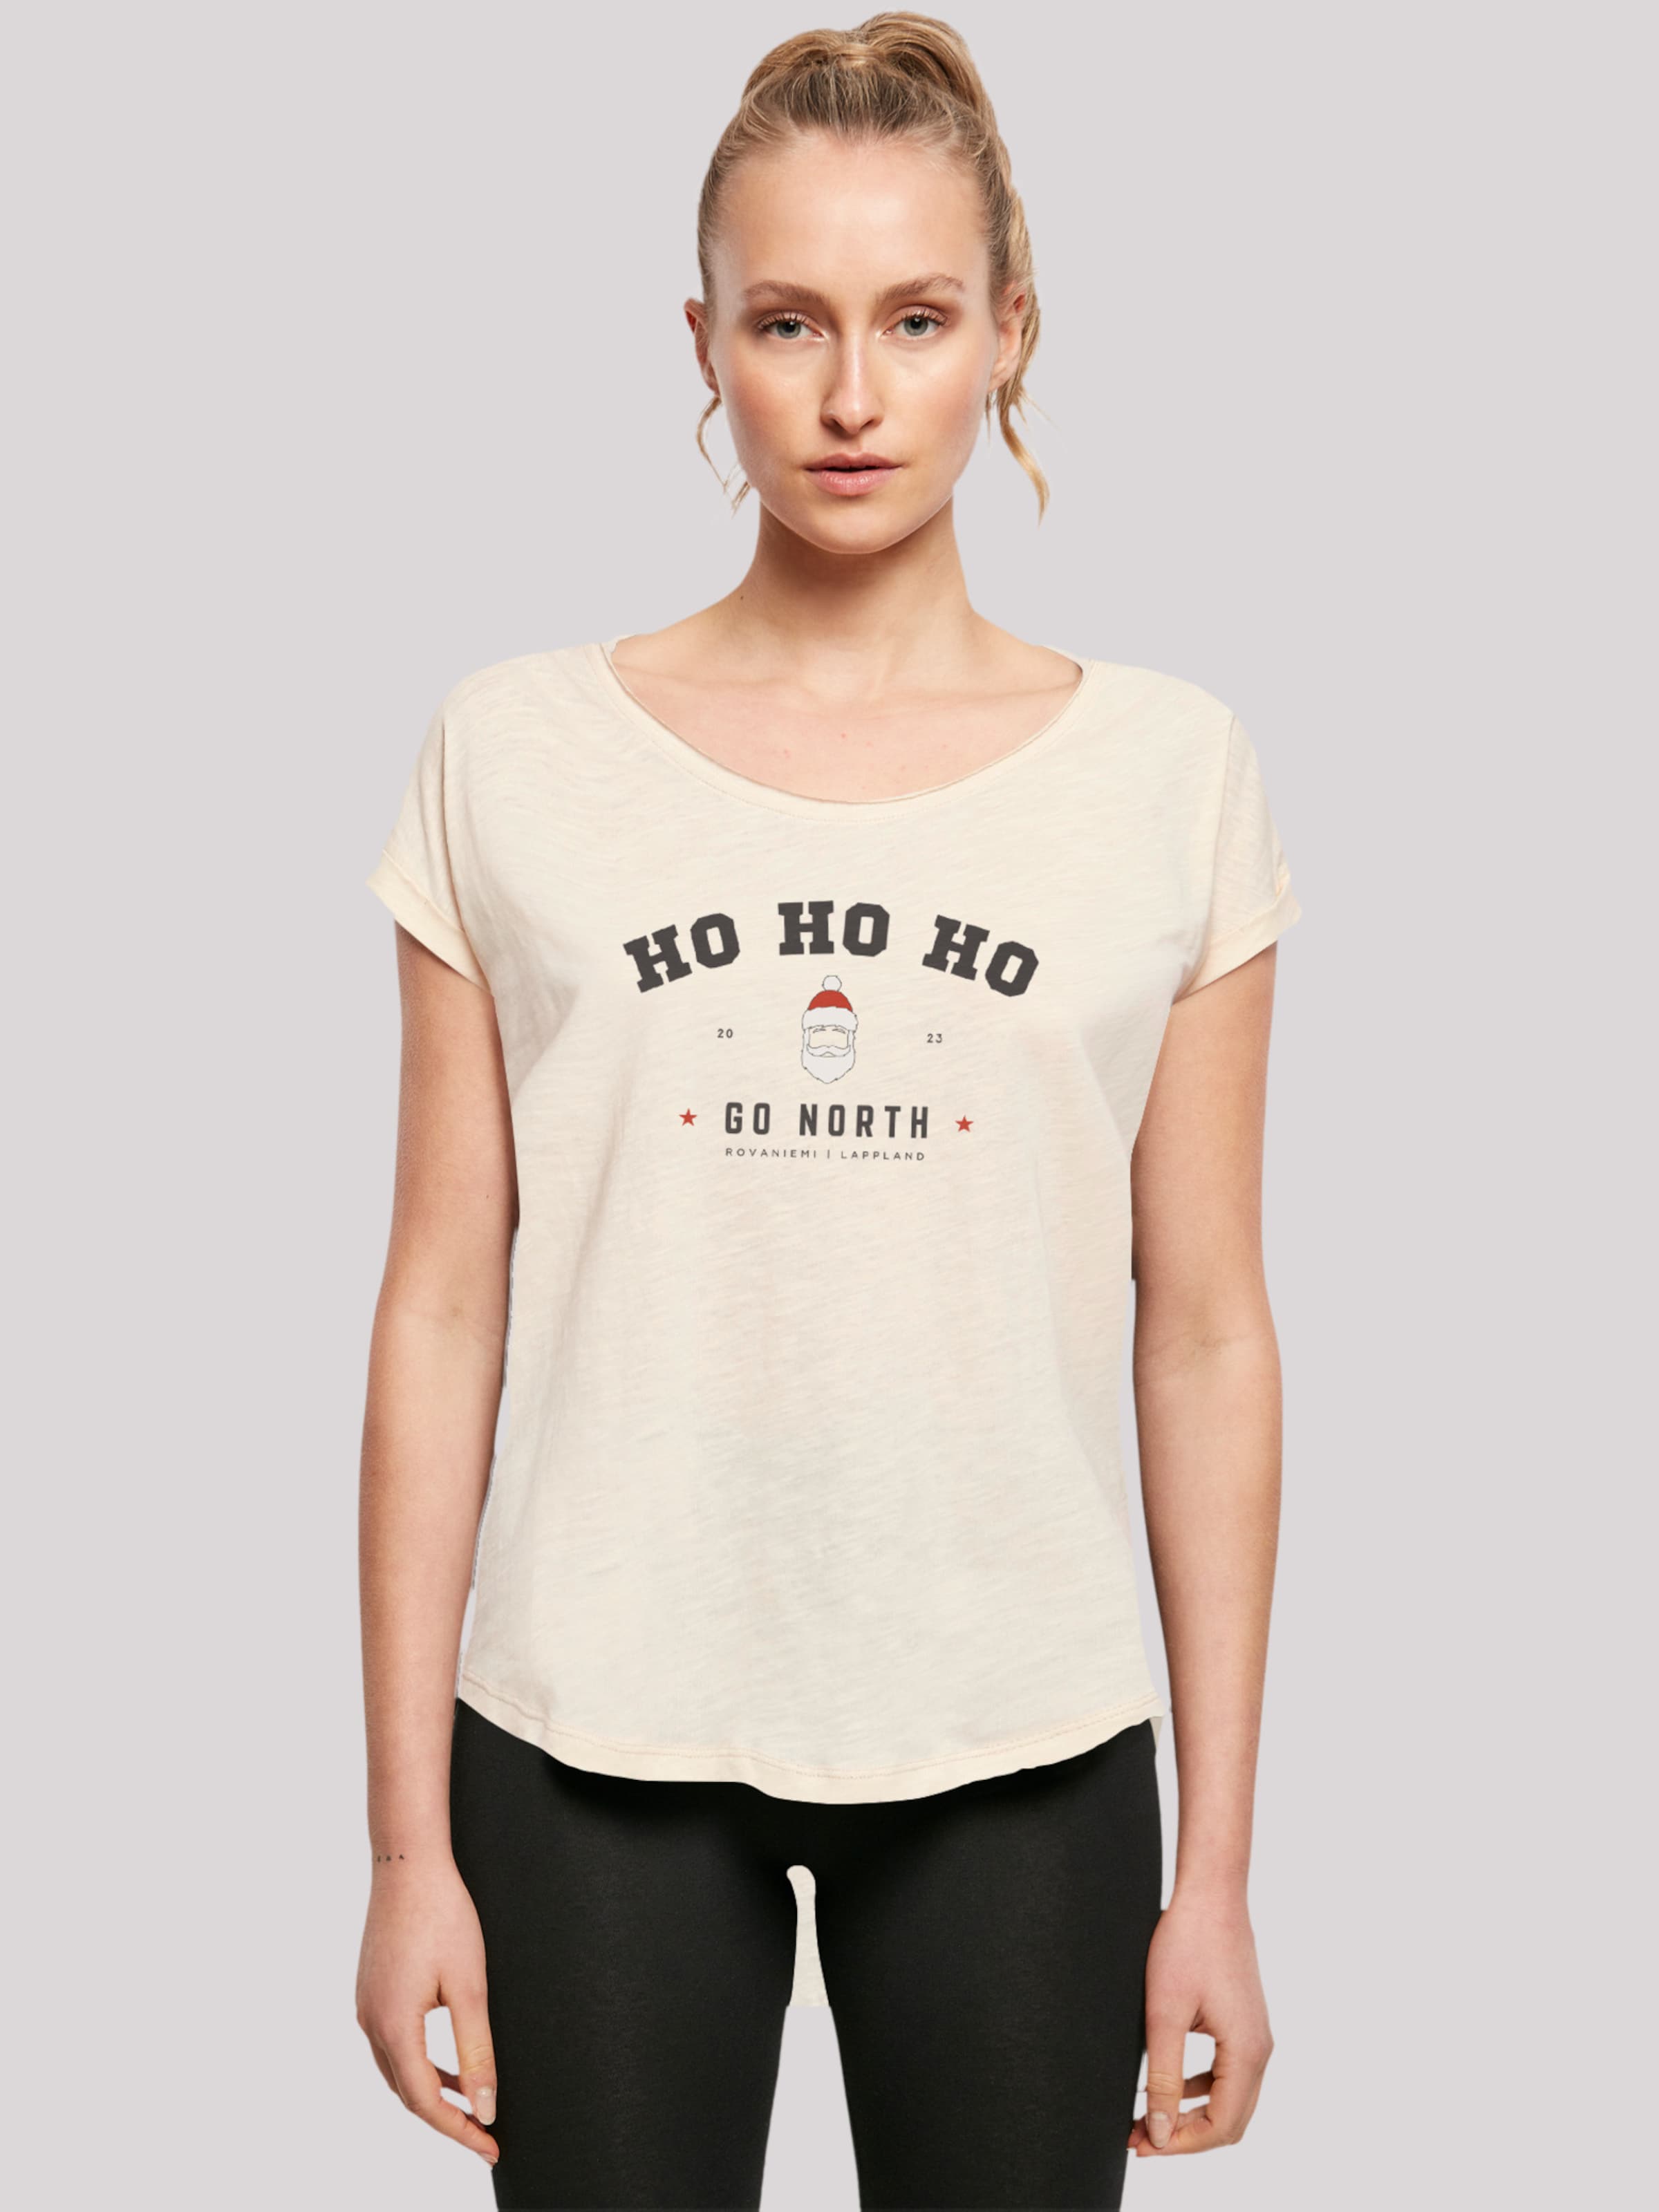 F4NT4STIC Shirt Weihnachten\' | Claus \'Ho YOU Ho Santa ABOUT Ho Beige in